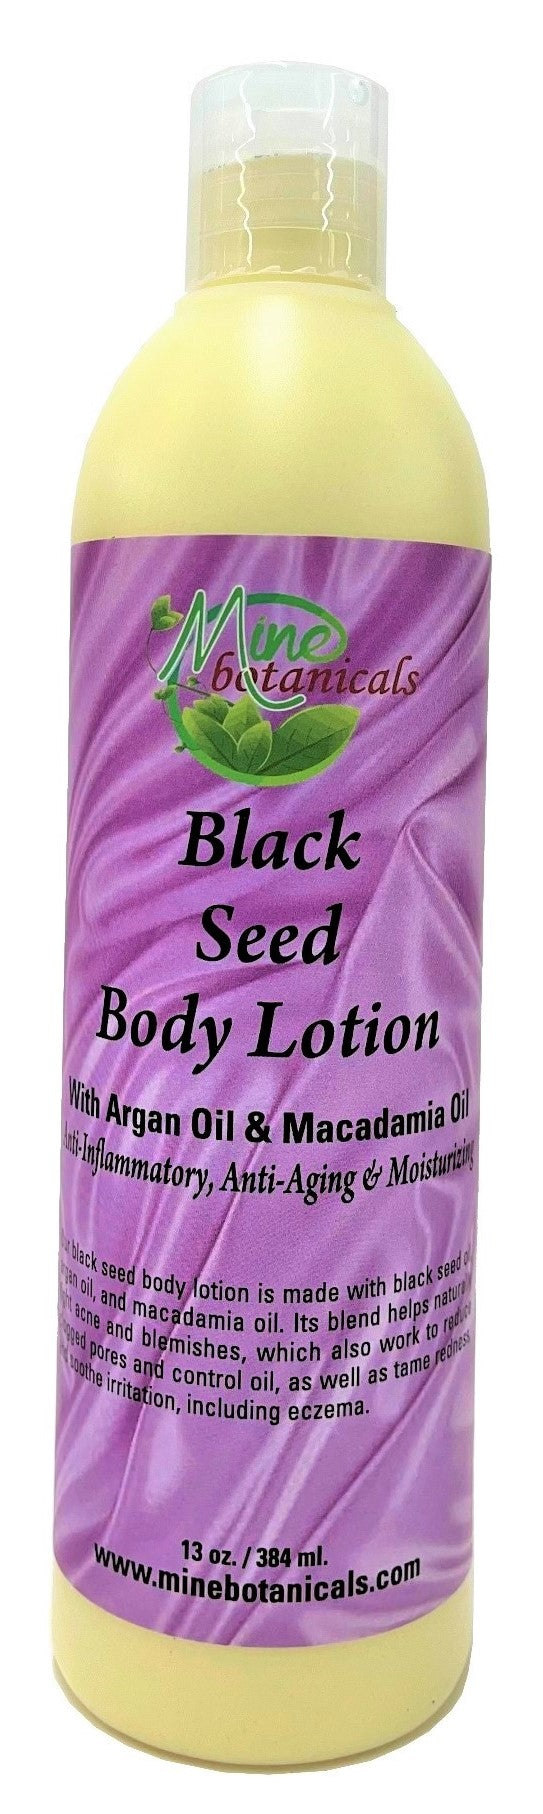 Black seed Body Lotion